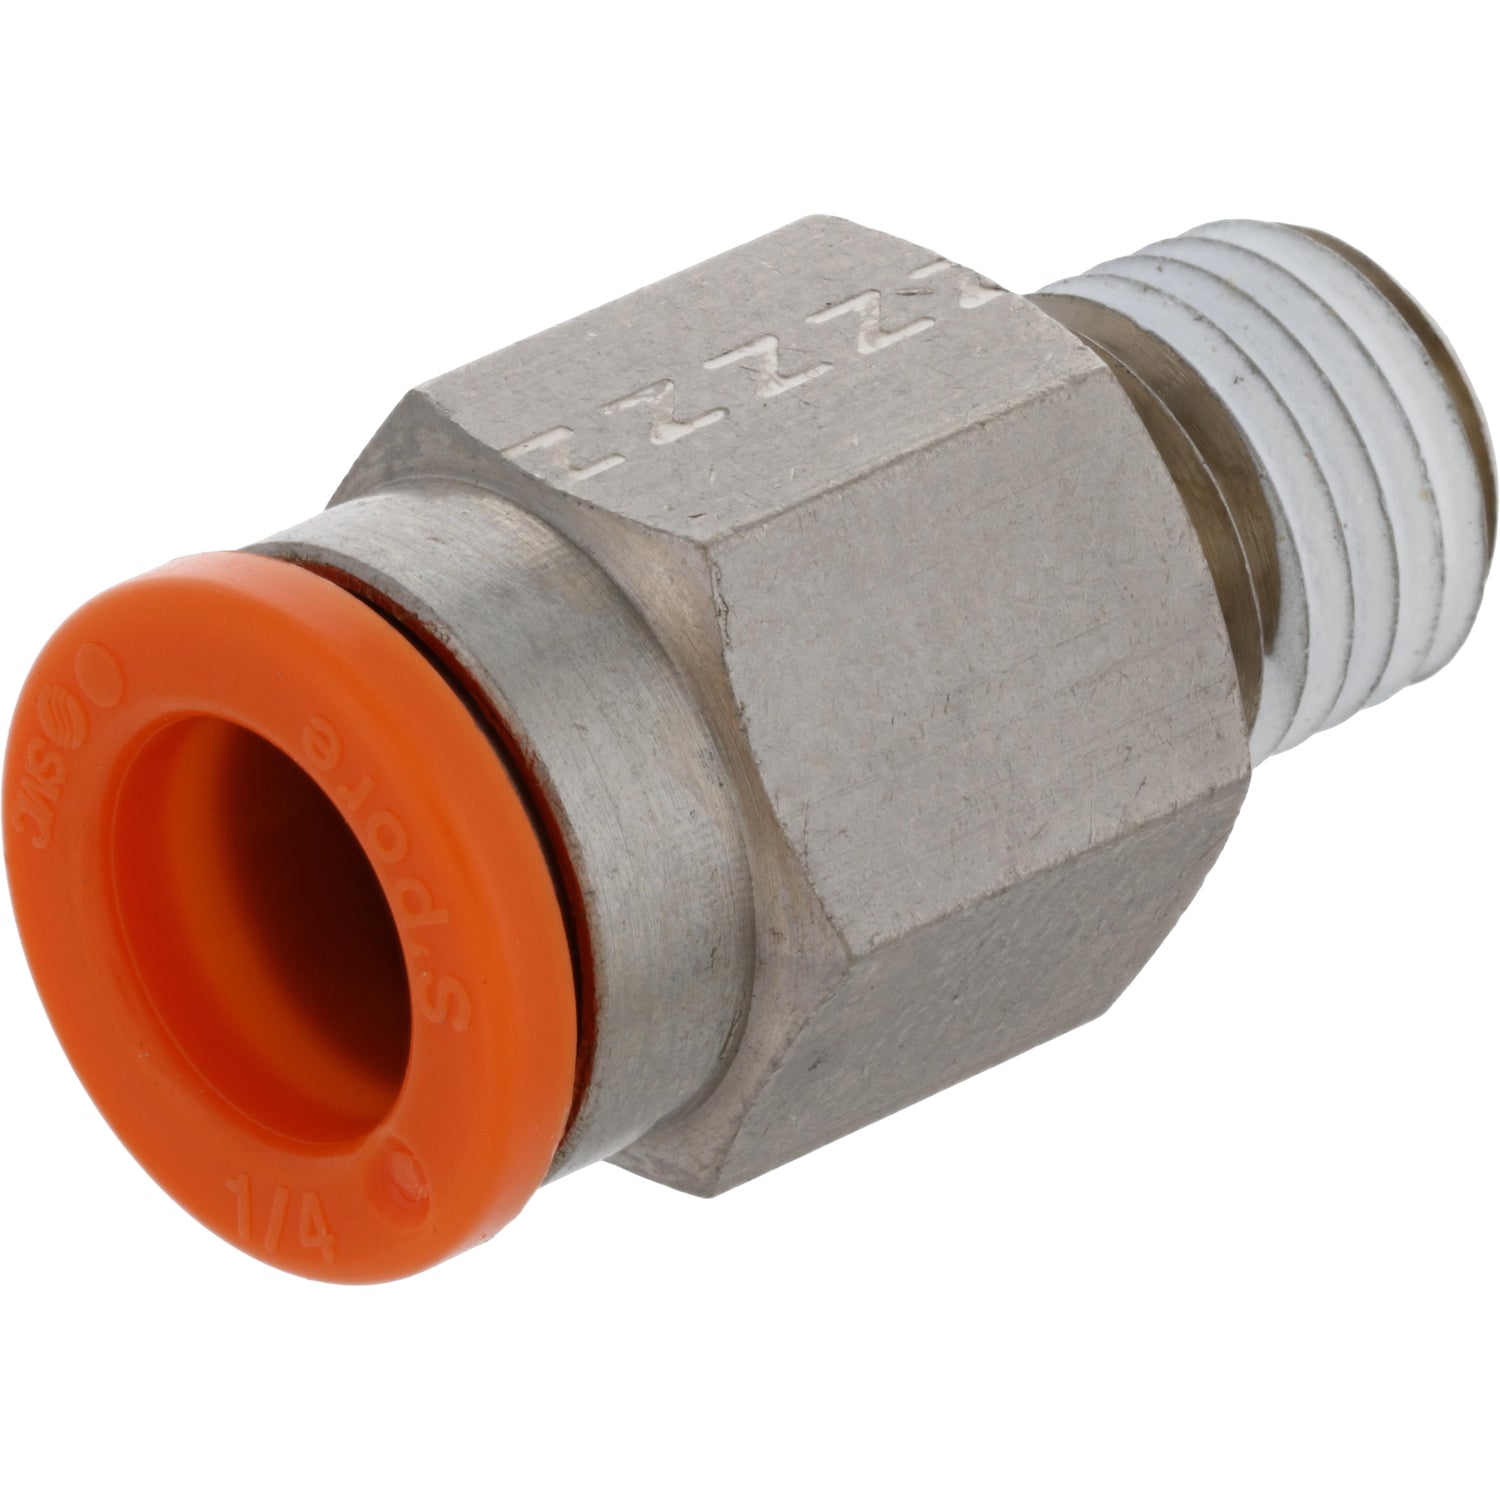 Brass push-in connector with orange collar on white background.